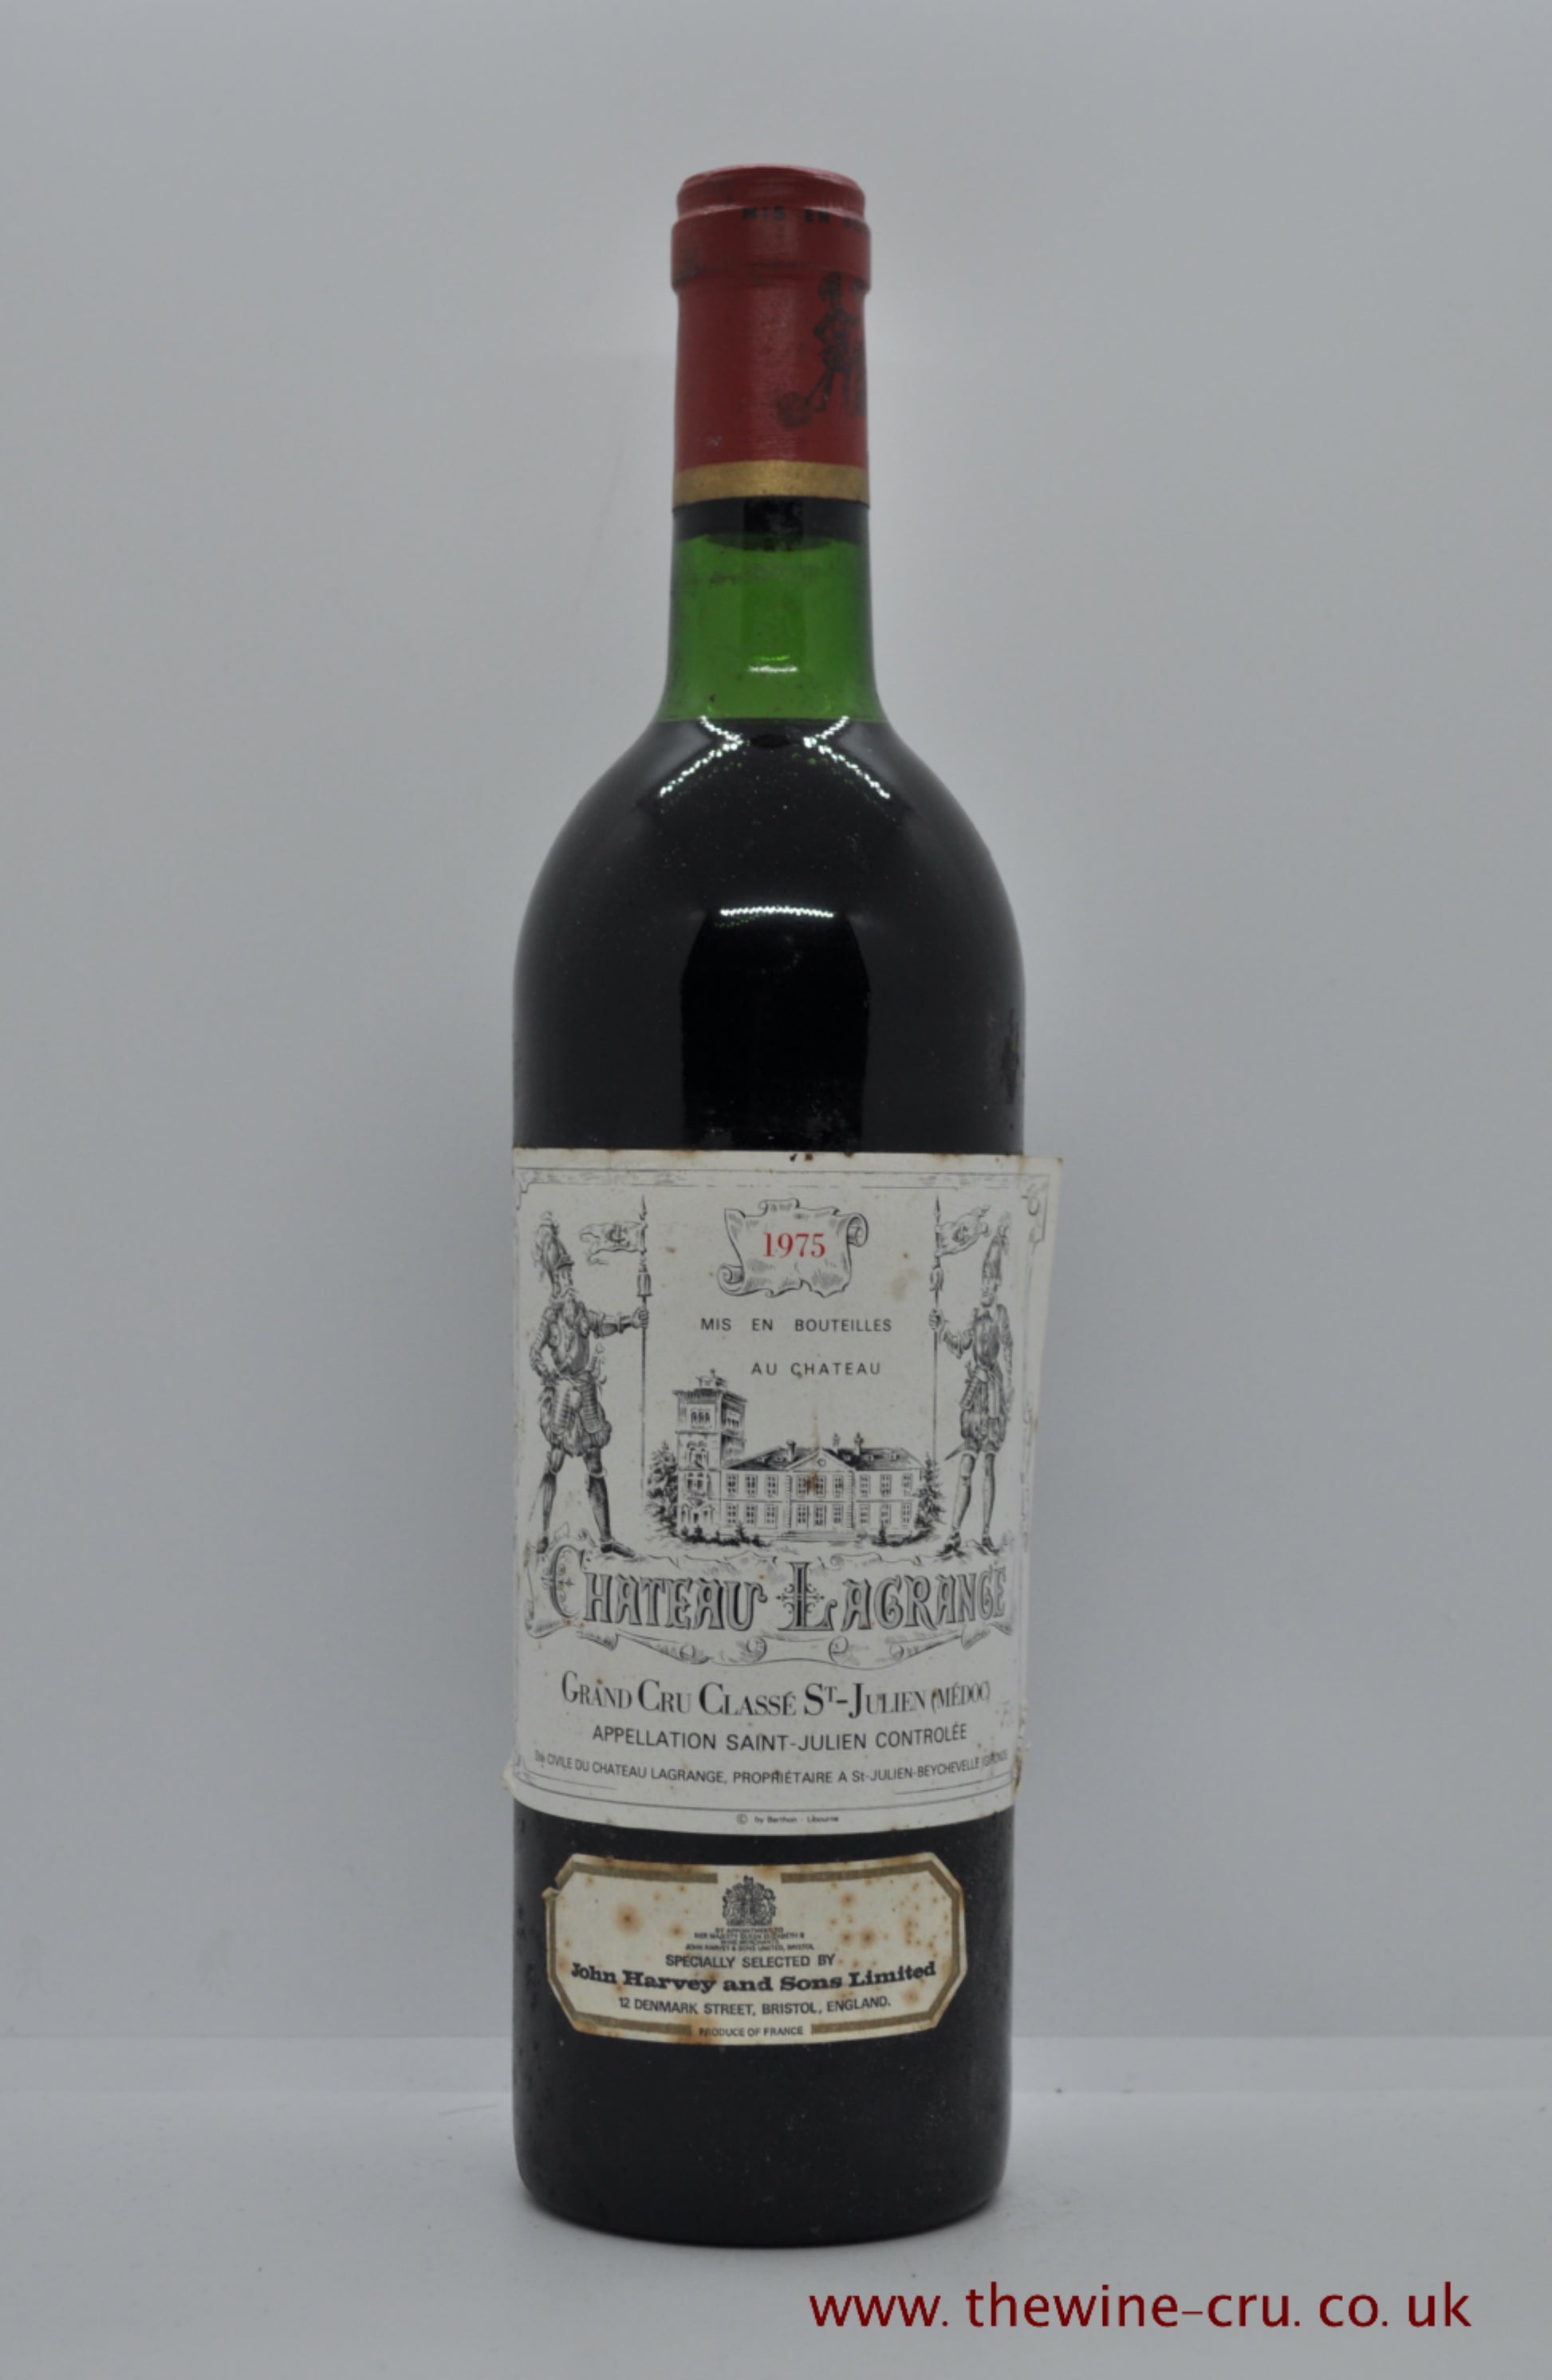 1975 vintage red wine. Chateau Lagrange 1975. France Bordeaux. Immediate delivery. free local delivery.